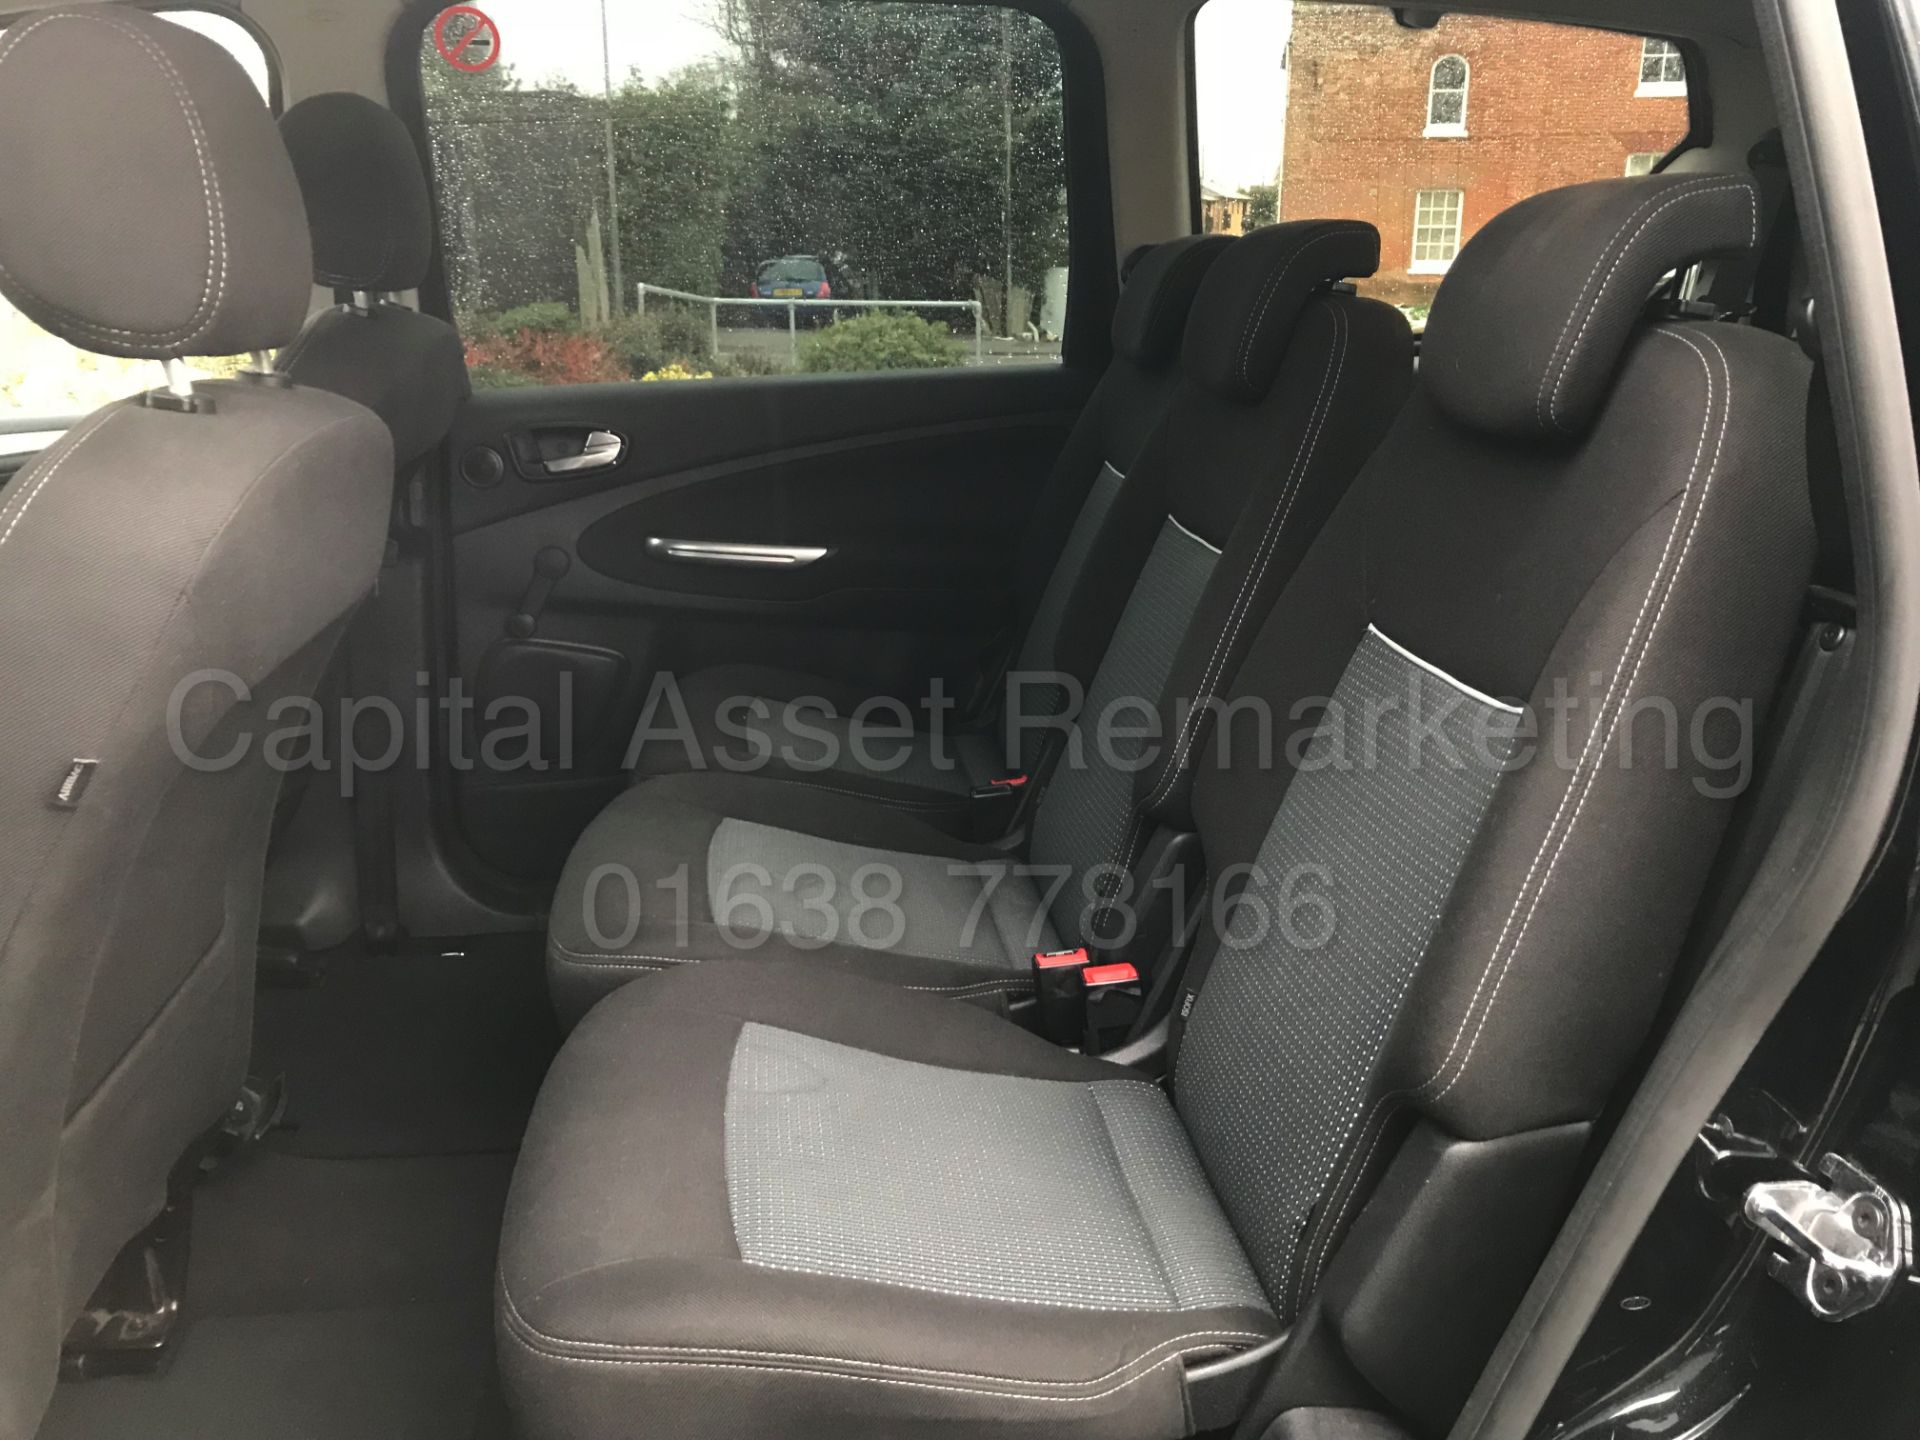 (On Sale) FORD GALAXY 'ZETEC' 7 SEATER (2014 - 14 REG) 2.0 TDCI - 140 BHP - POWER SHIFT (1 OWNER) - Image 14 of 30